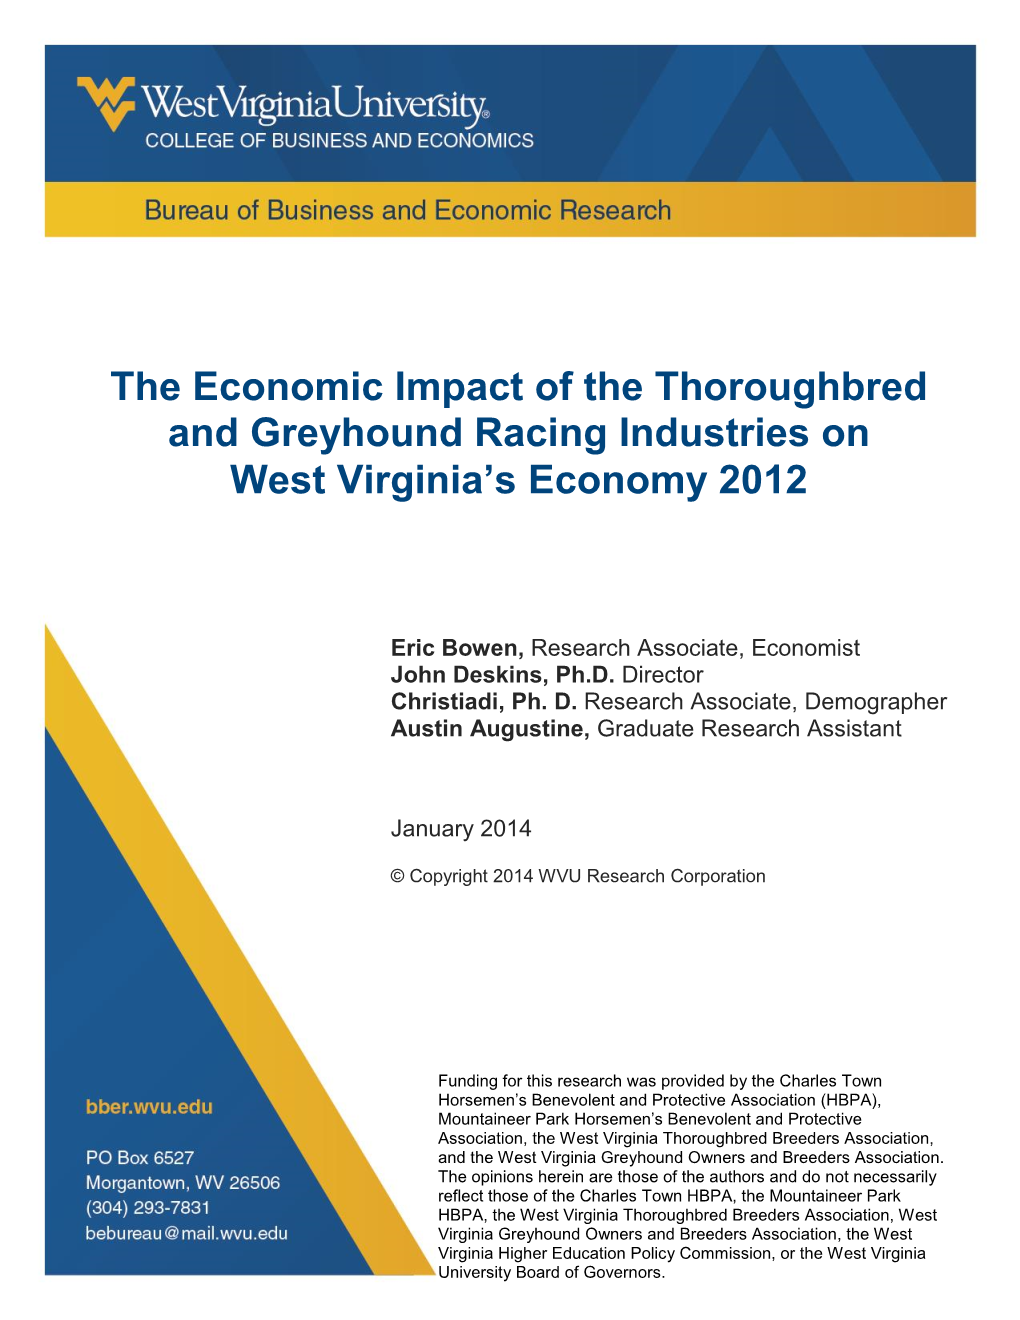 The Economic Impact of the Thoroughbred and Greyhound Racing Industries on West Virginia’S Economy 2012